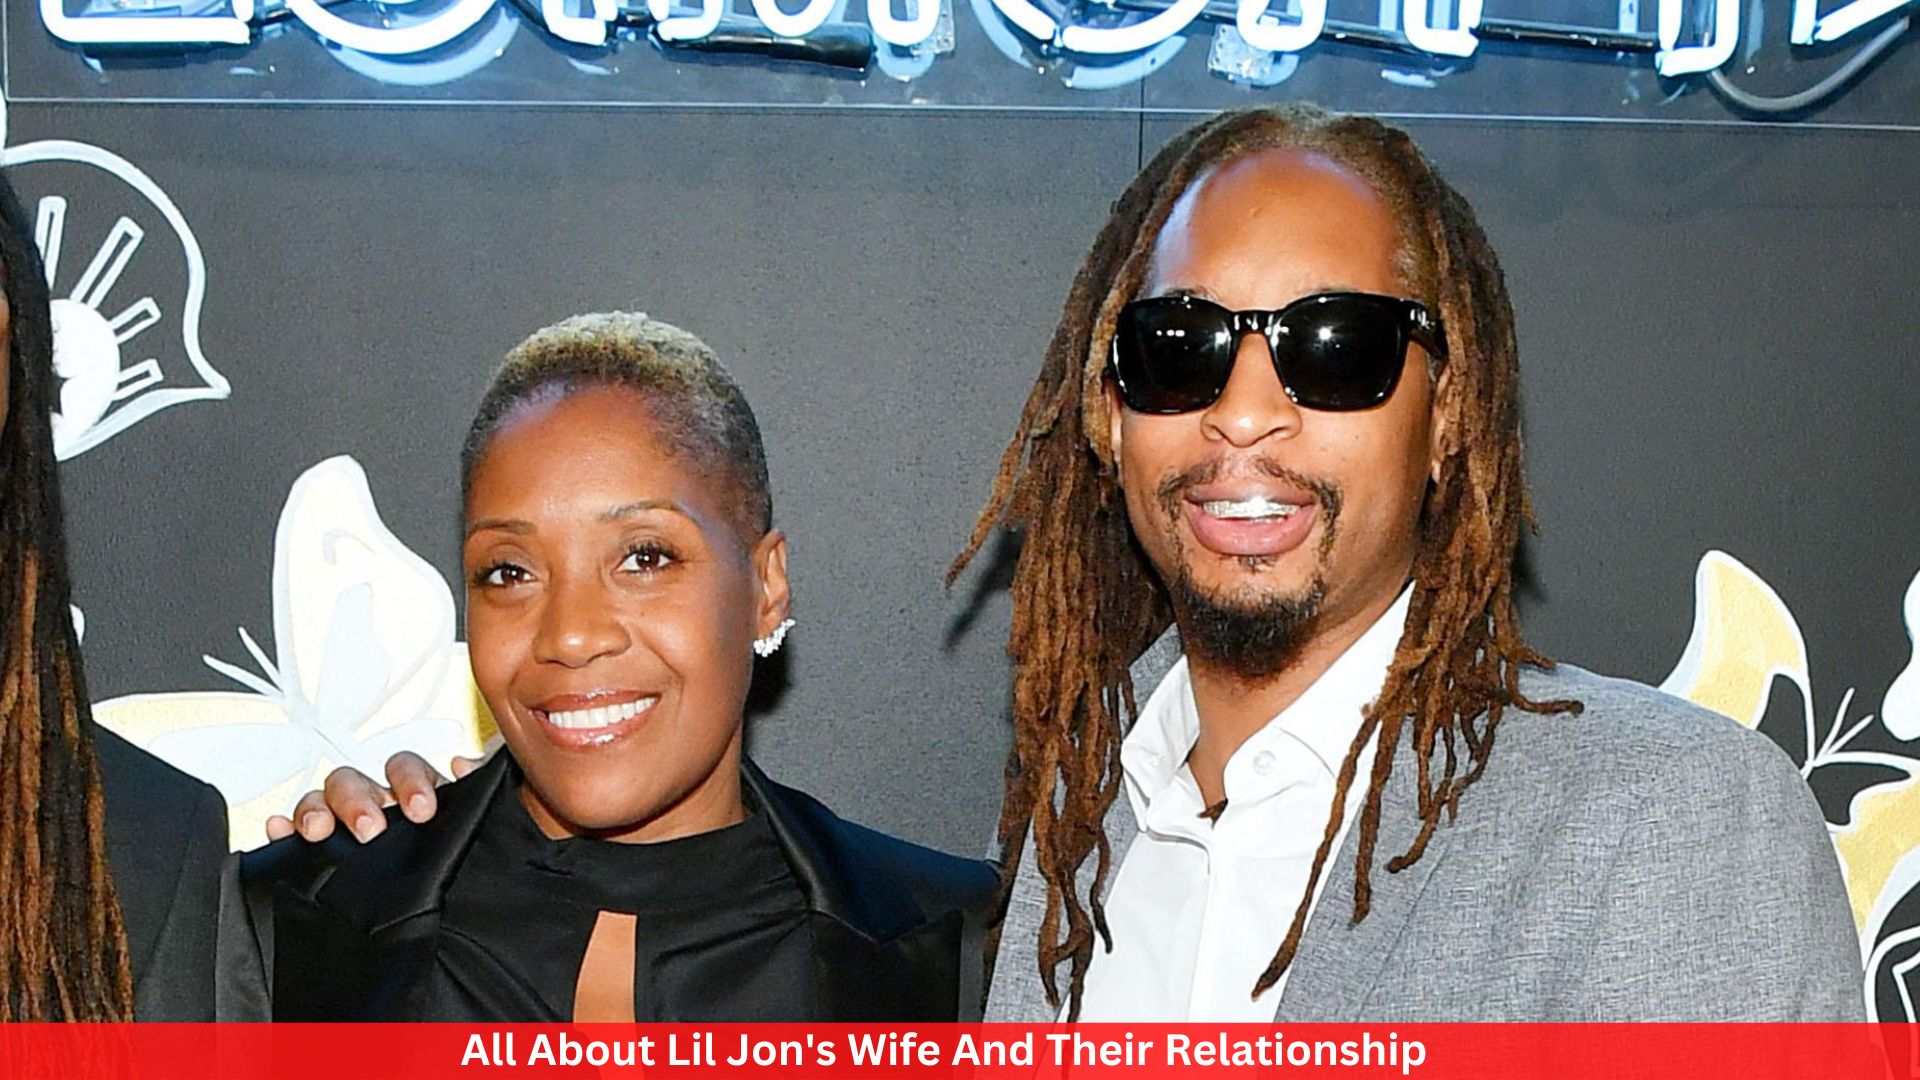 All About Lil Jon's Wife And Their Relationship